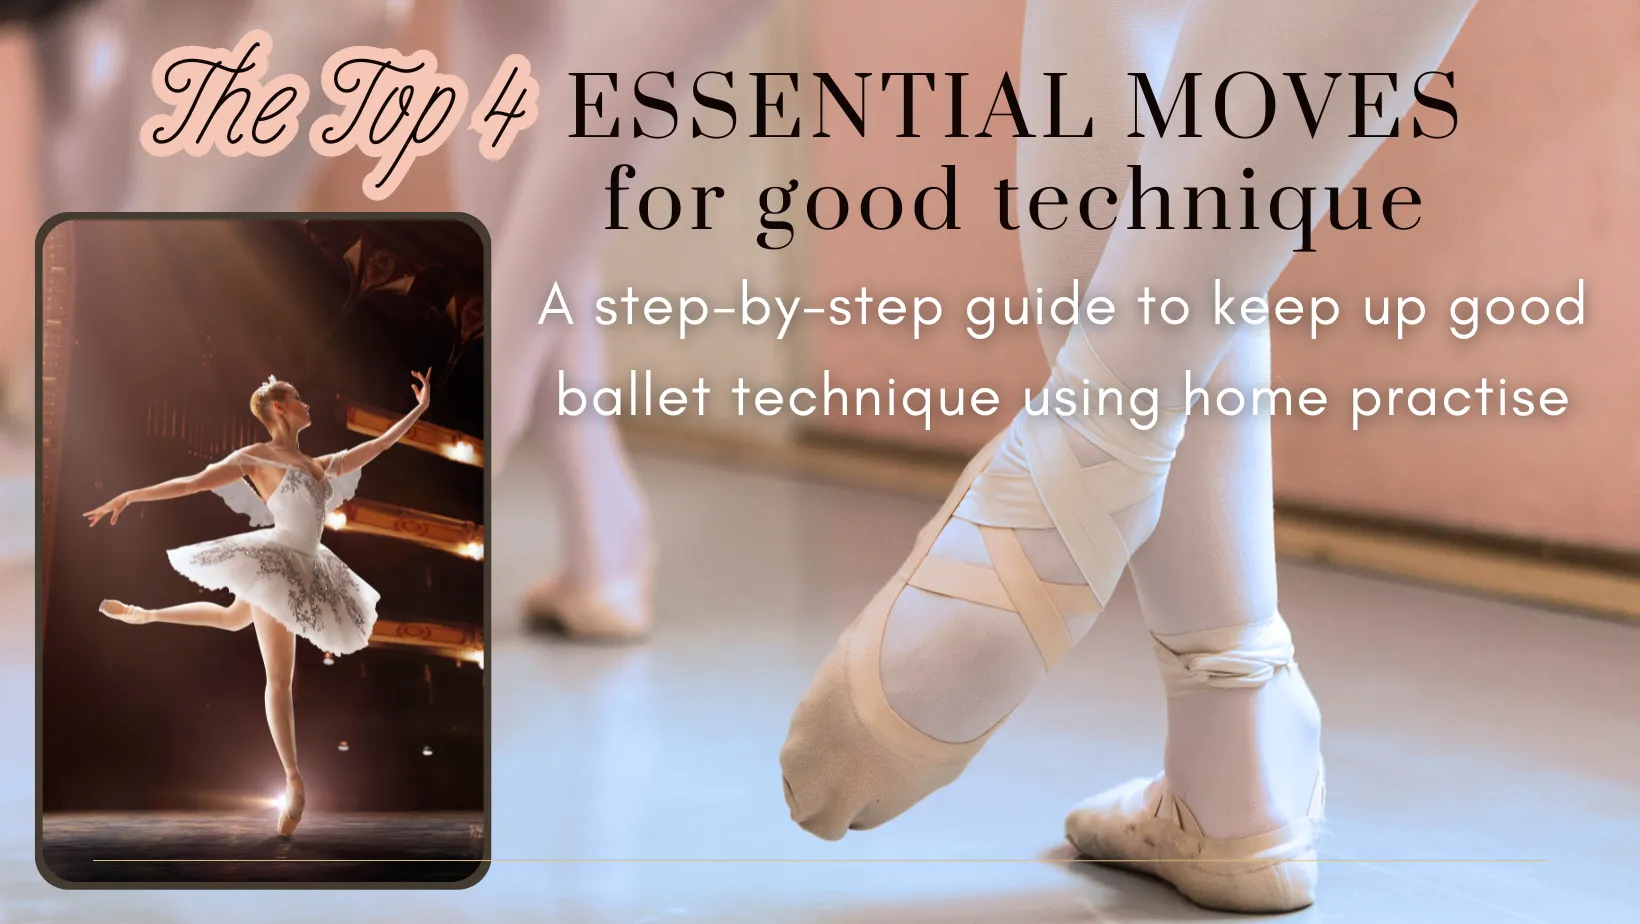 The Top 4: Essential Moves for Good Technique E-Guide